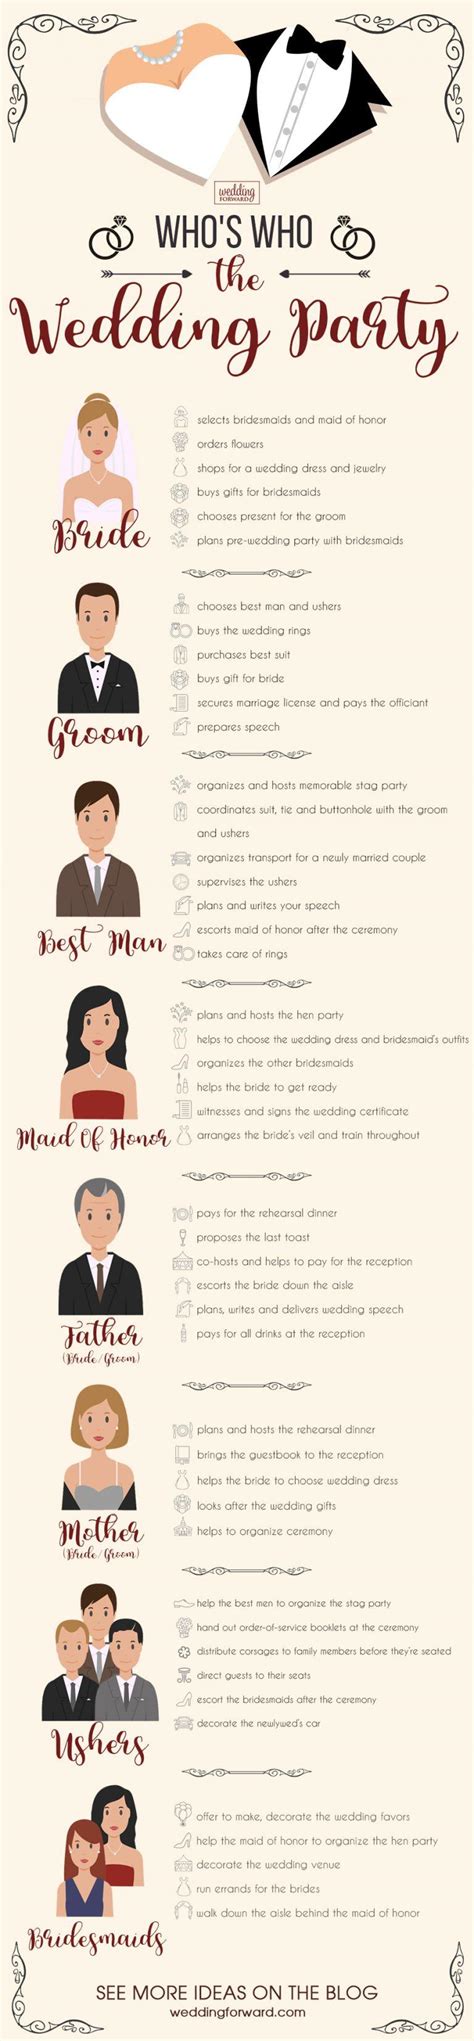 Wedding Party Roles And Responsibilities